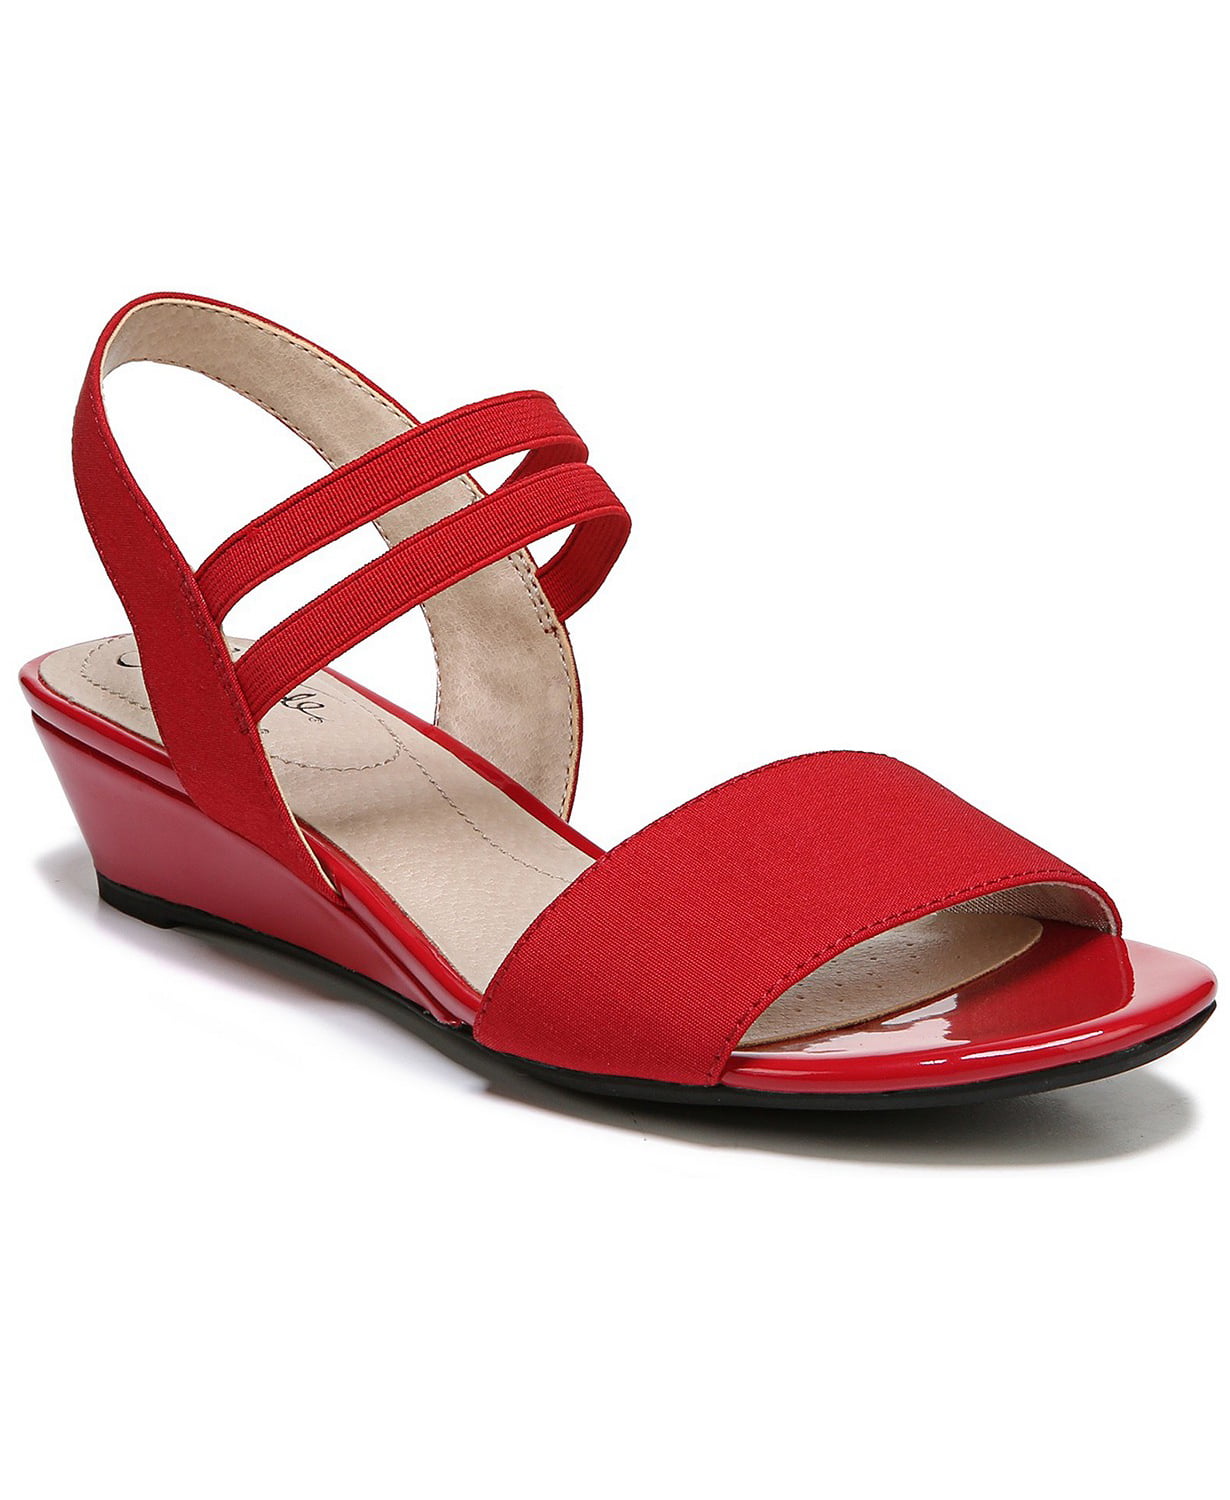 woocommerce-673321-2209615.cloudwaysapps.com-lifestride-womens-red-yolo-ankle-strap-sandals